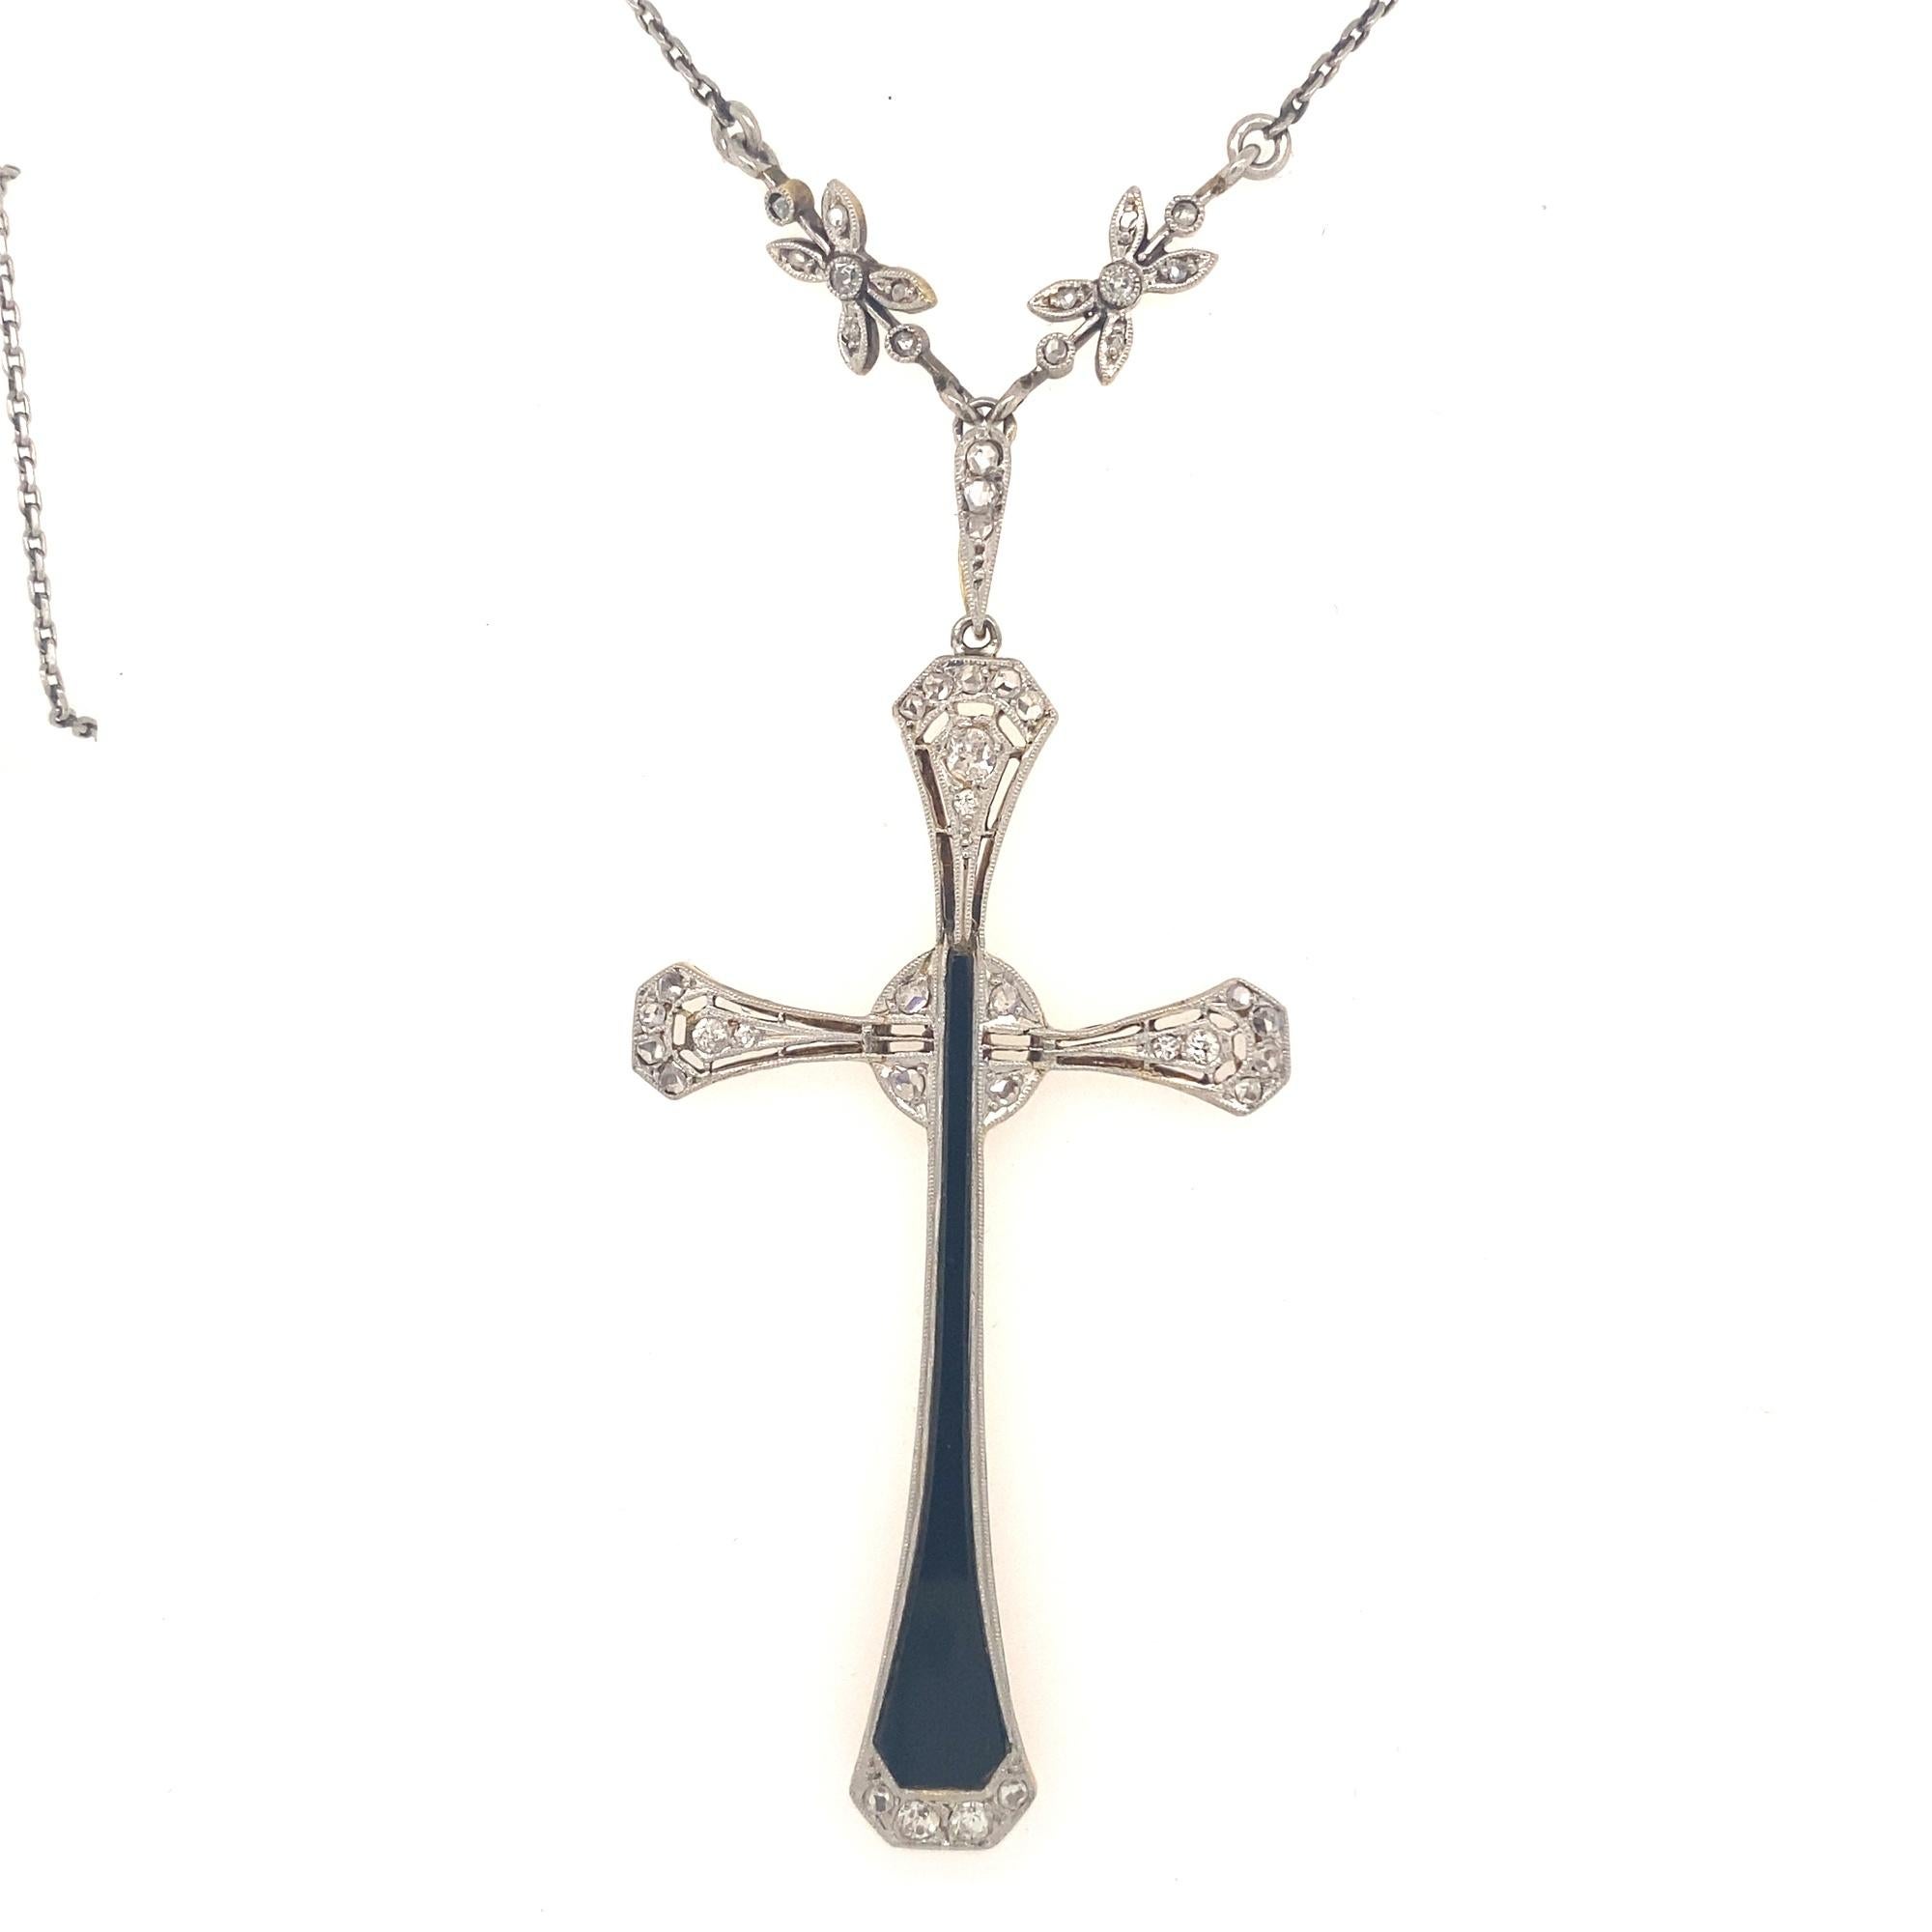 This is a beautiful original art deco cross C.1930 set with black onyx diamonds in platinum with an 18K gold back. The chain necklace has floral designs with 14 rose cut diamonds. The pendant has a large black onyx section with 30 old mine and rose